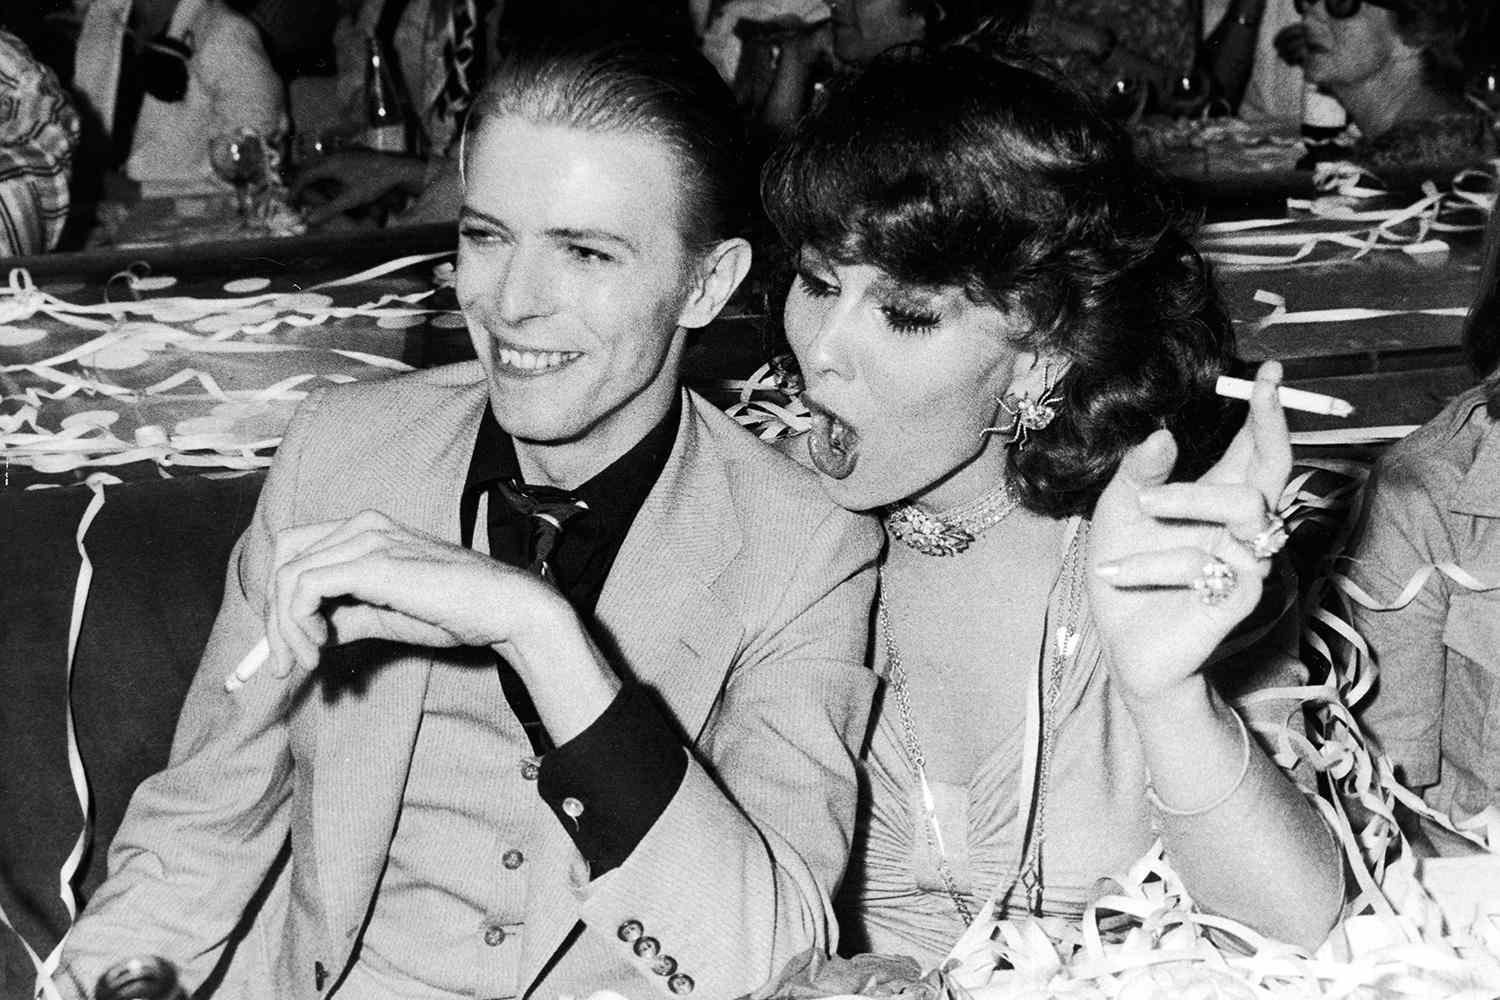 British rock singer and actor David Bowie sits and holds a cigarette with Dutch actor Romy Haag at the club L'Alcazar, following his concert at the Pavilion, Paris, France, May 18, 1976